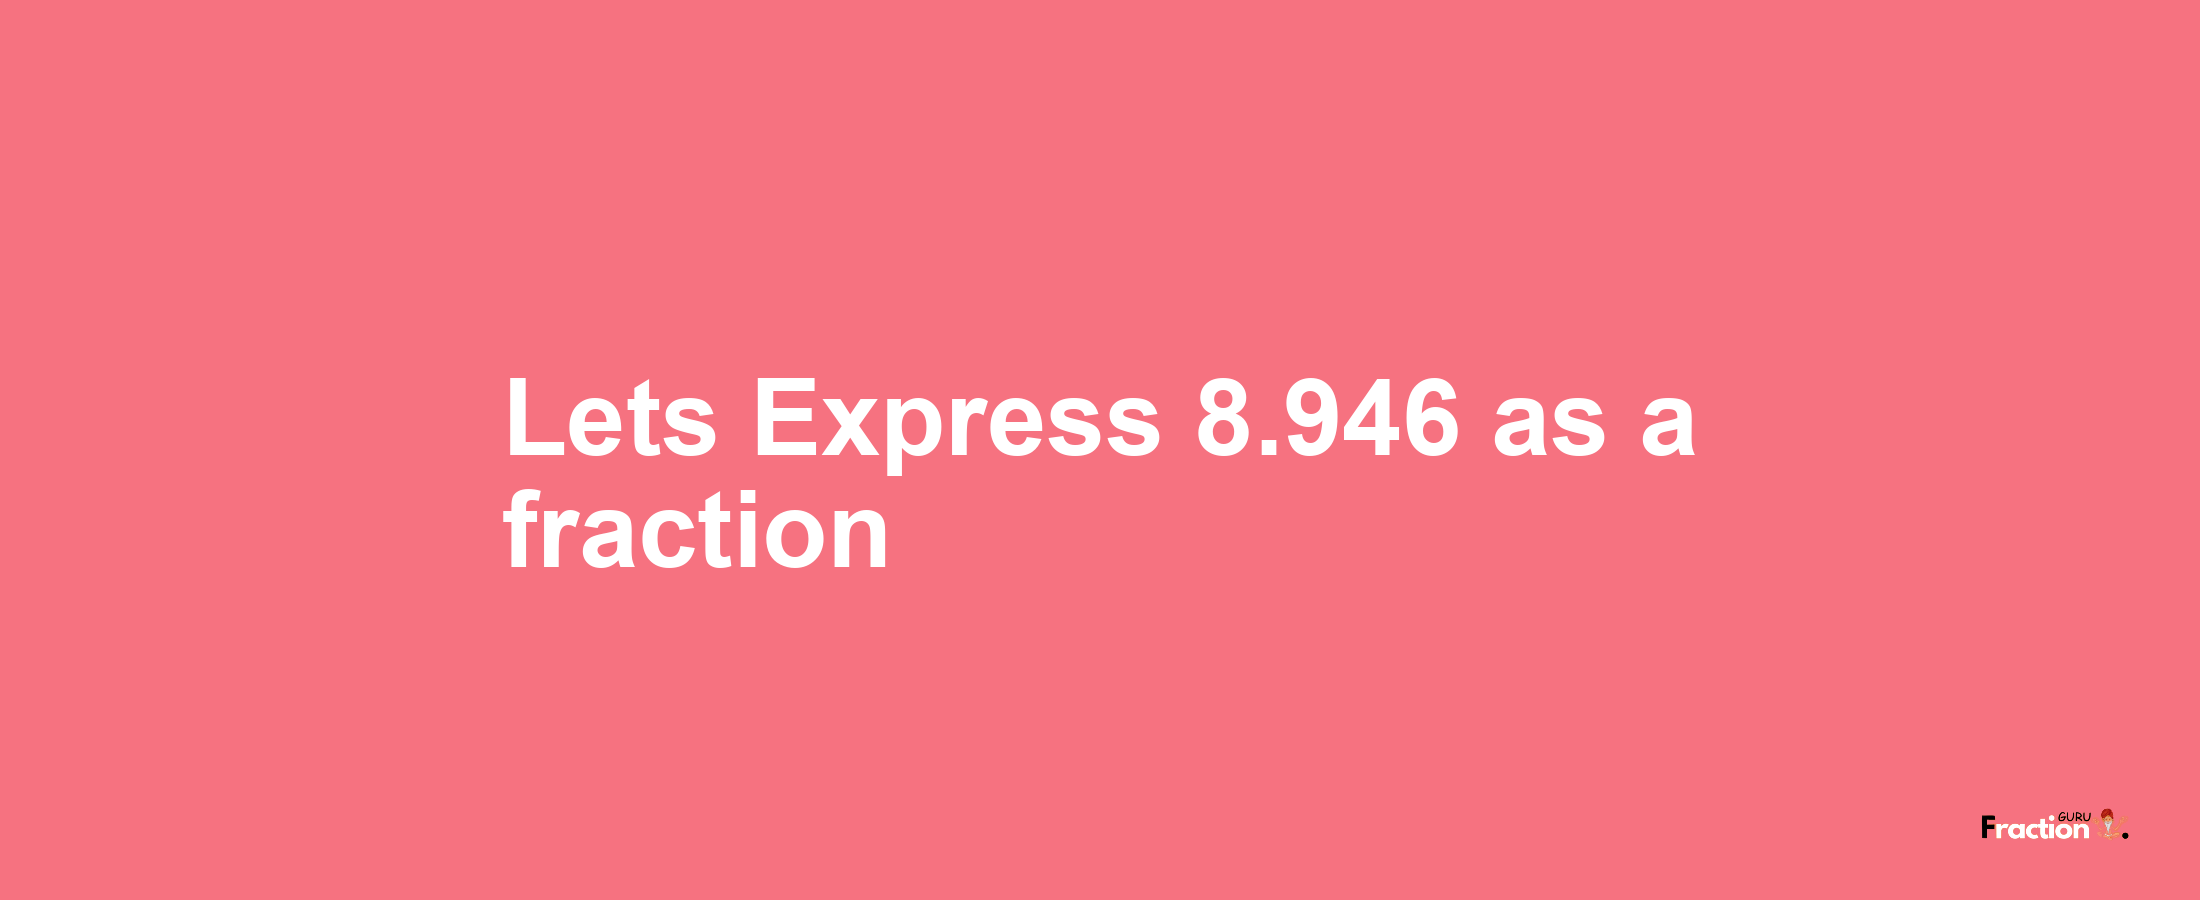 Lets Express 8.946 as afraction